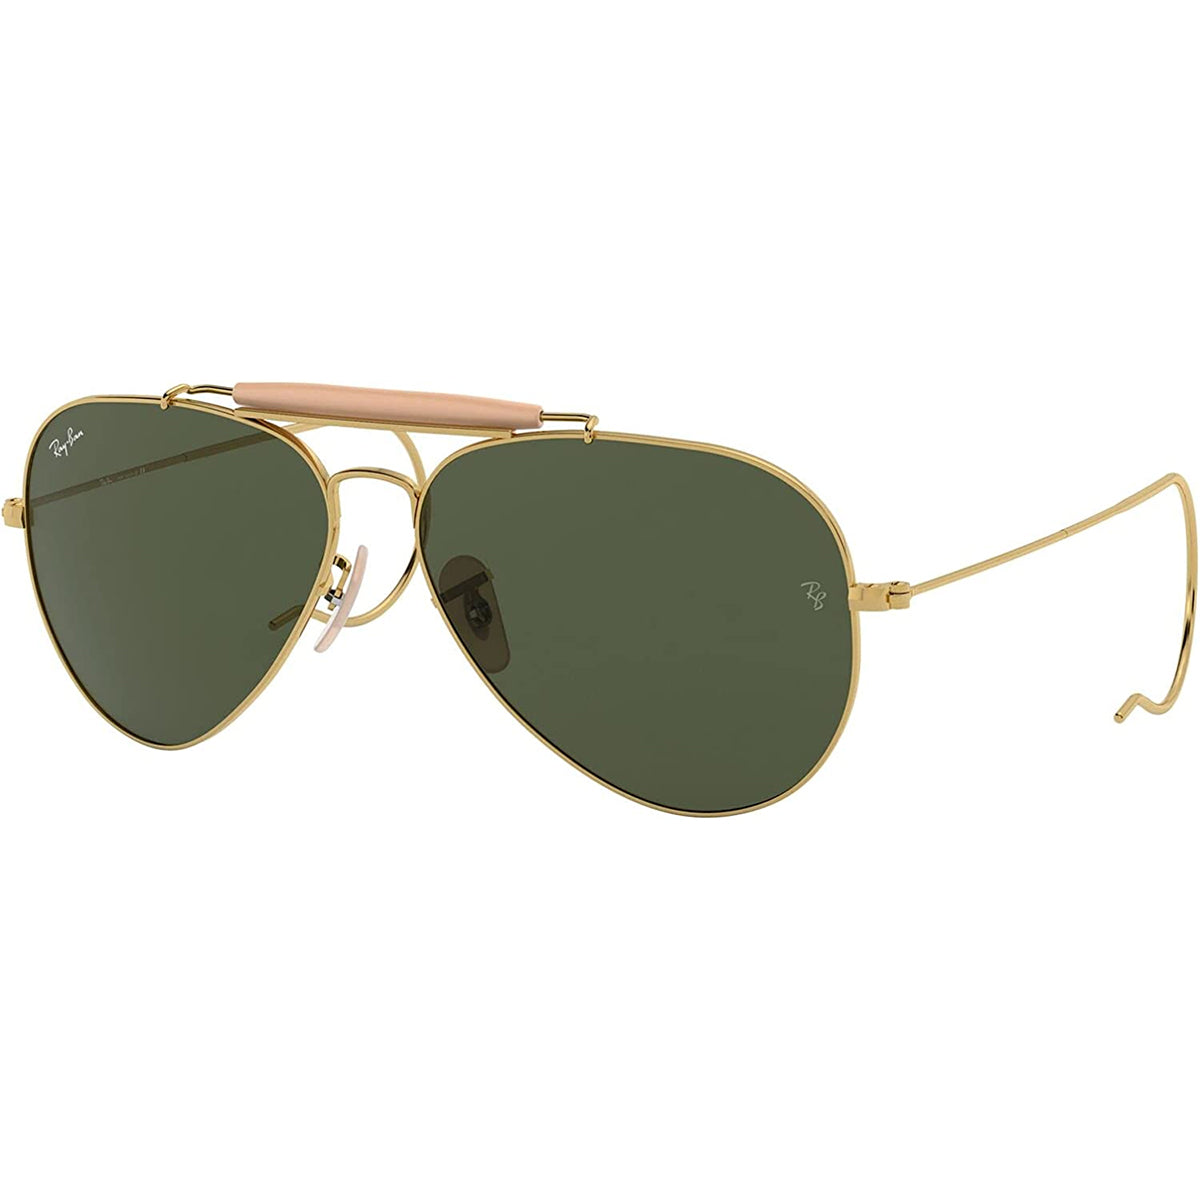 Ray-Ban Outdoorsman Men's Aviator Sunglasses - Gold Green / Classic G-15 /  One Size